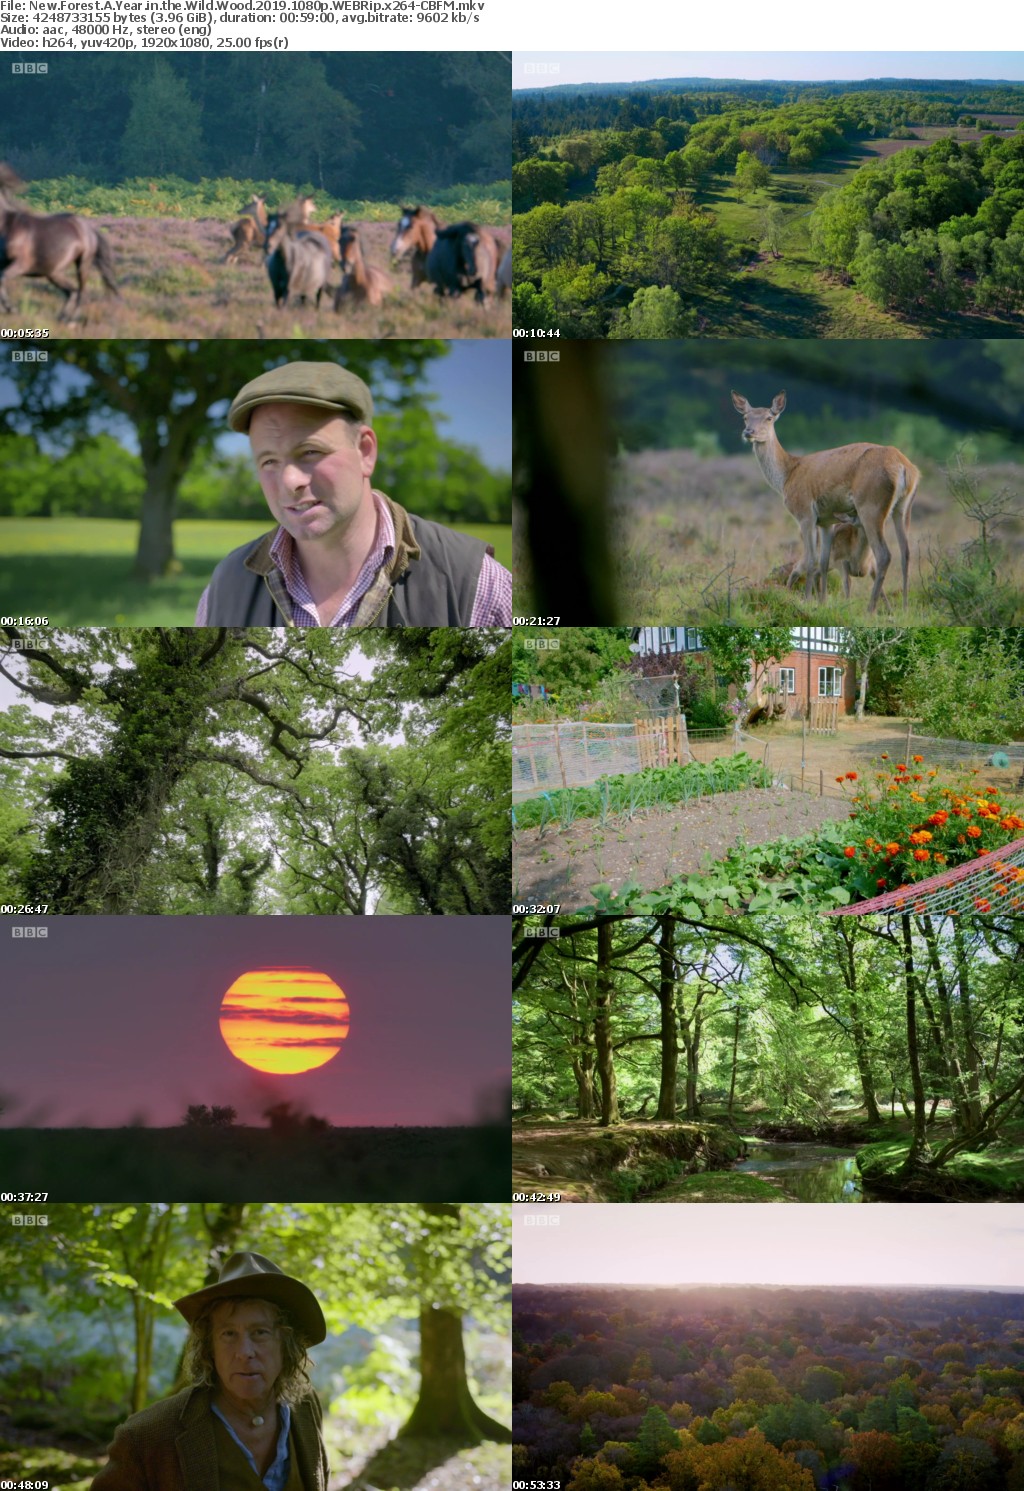 New Forest A Year in the Wild Wood 2019 1080p WEBRip x264-CBFM